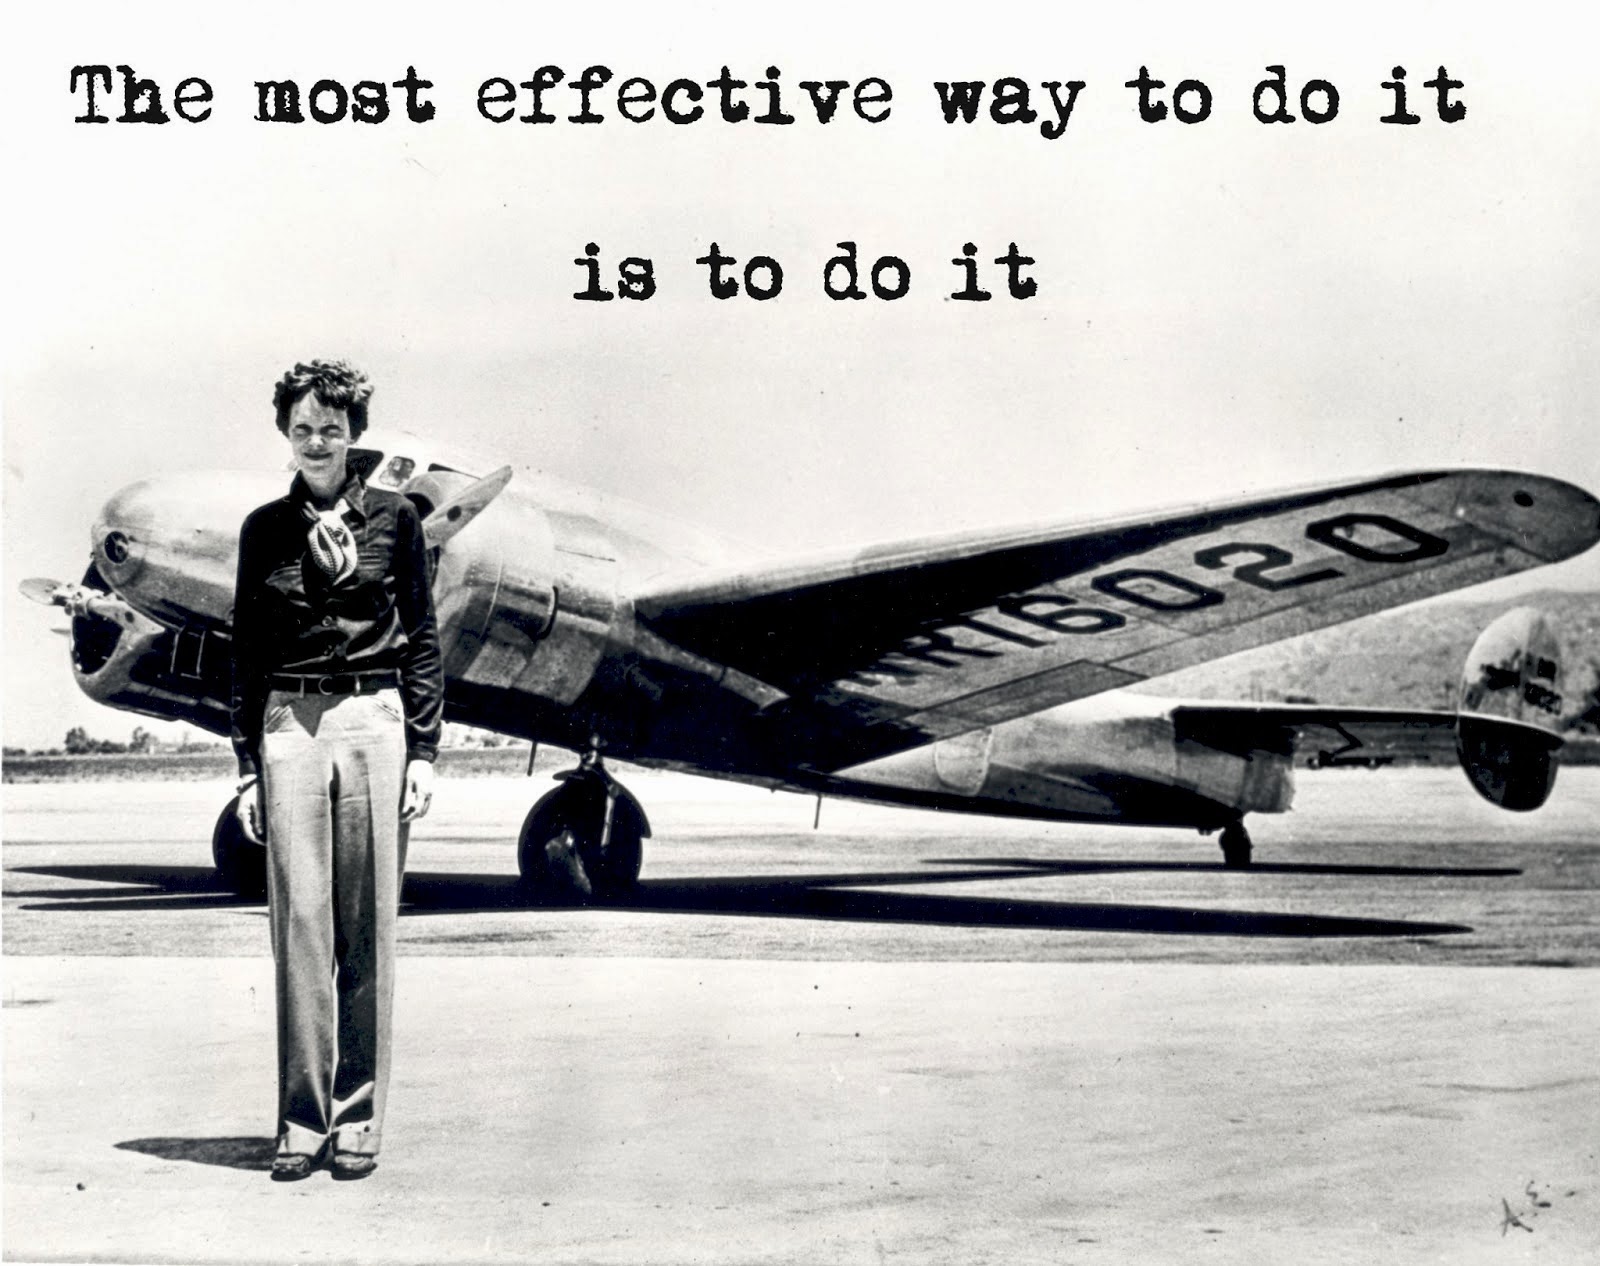 Amelia Earhart_The most effective way to do it is to do it